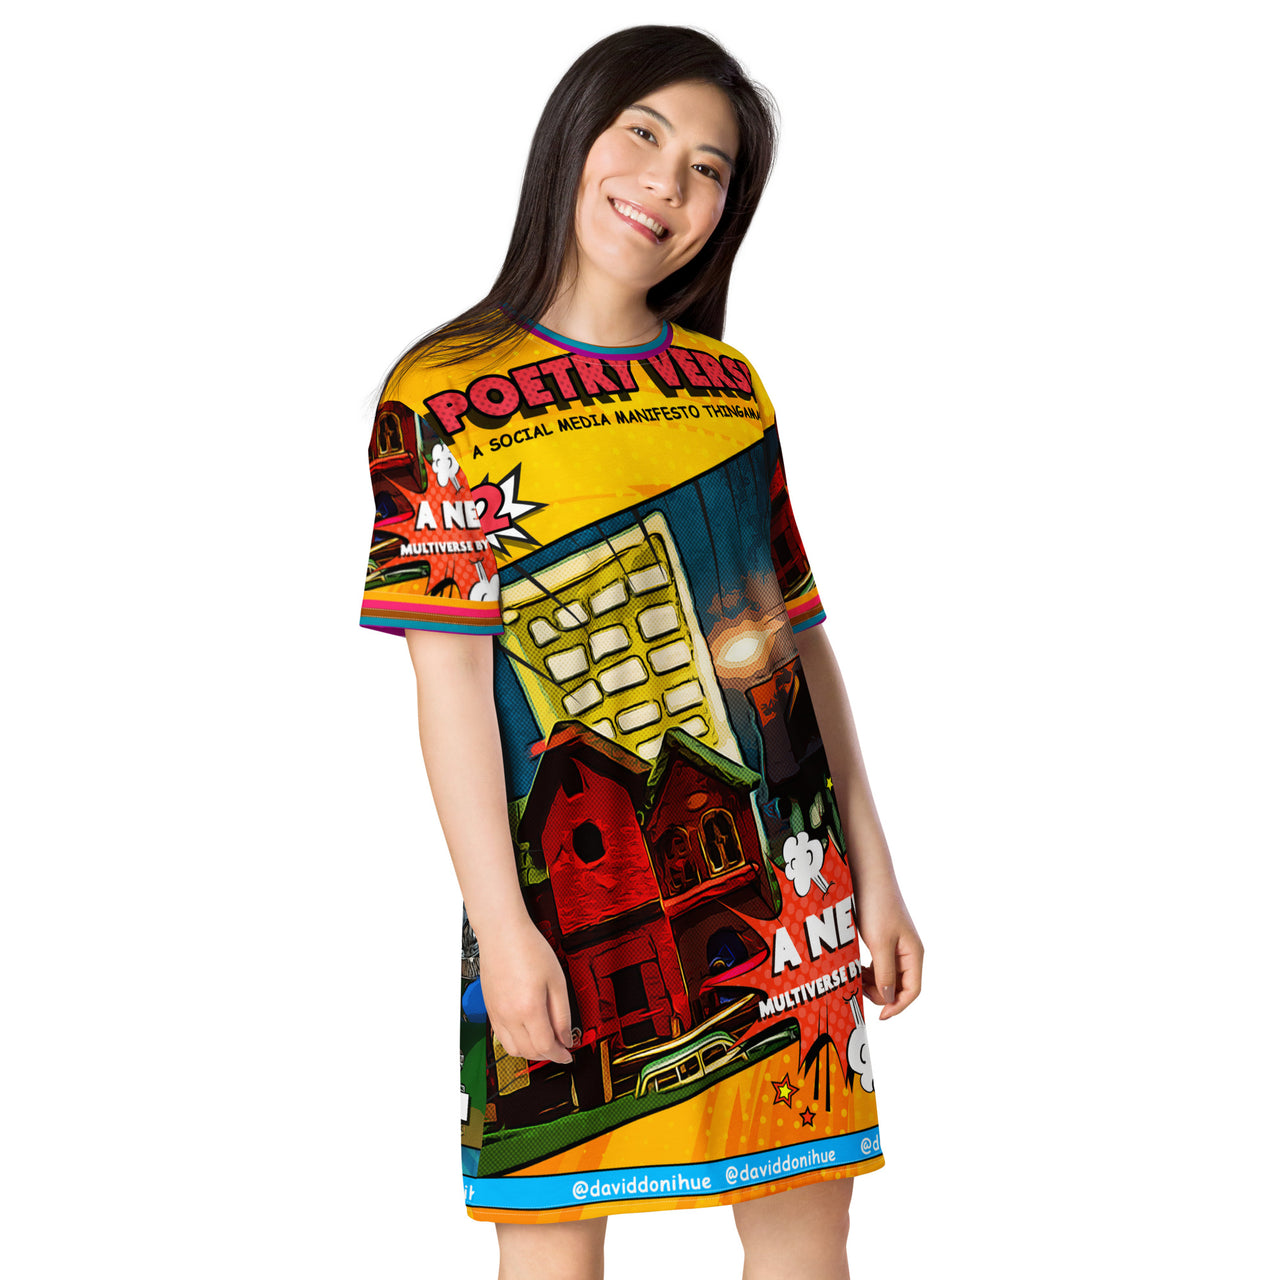 The Poetry Verse T-shirt dress